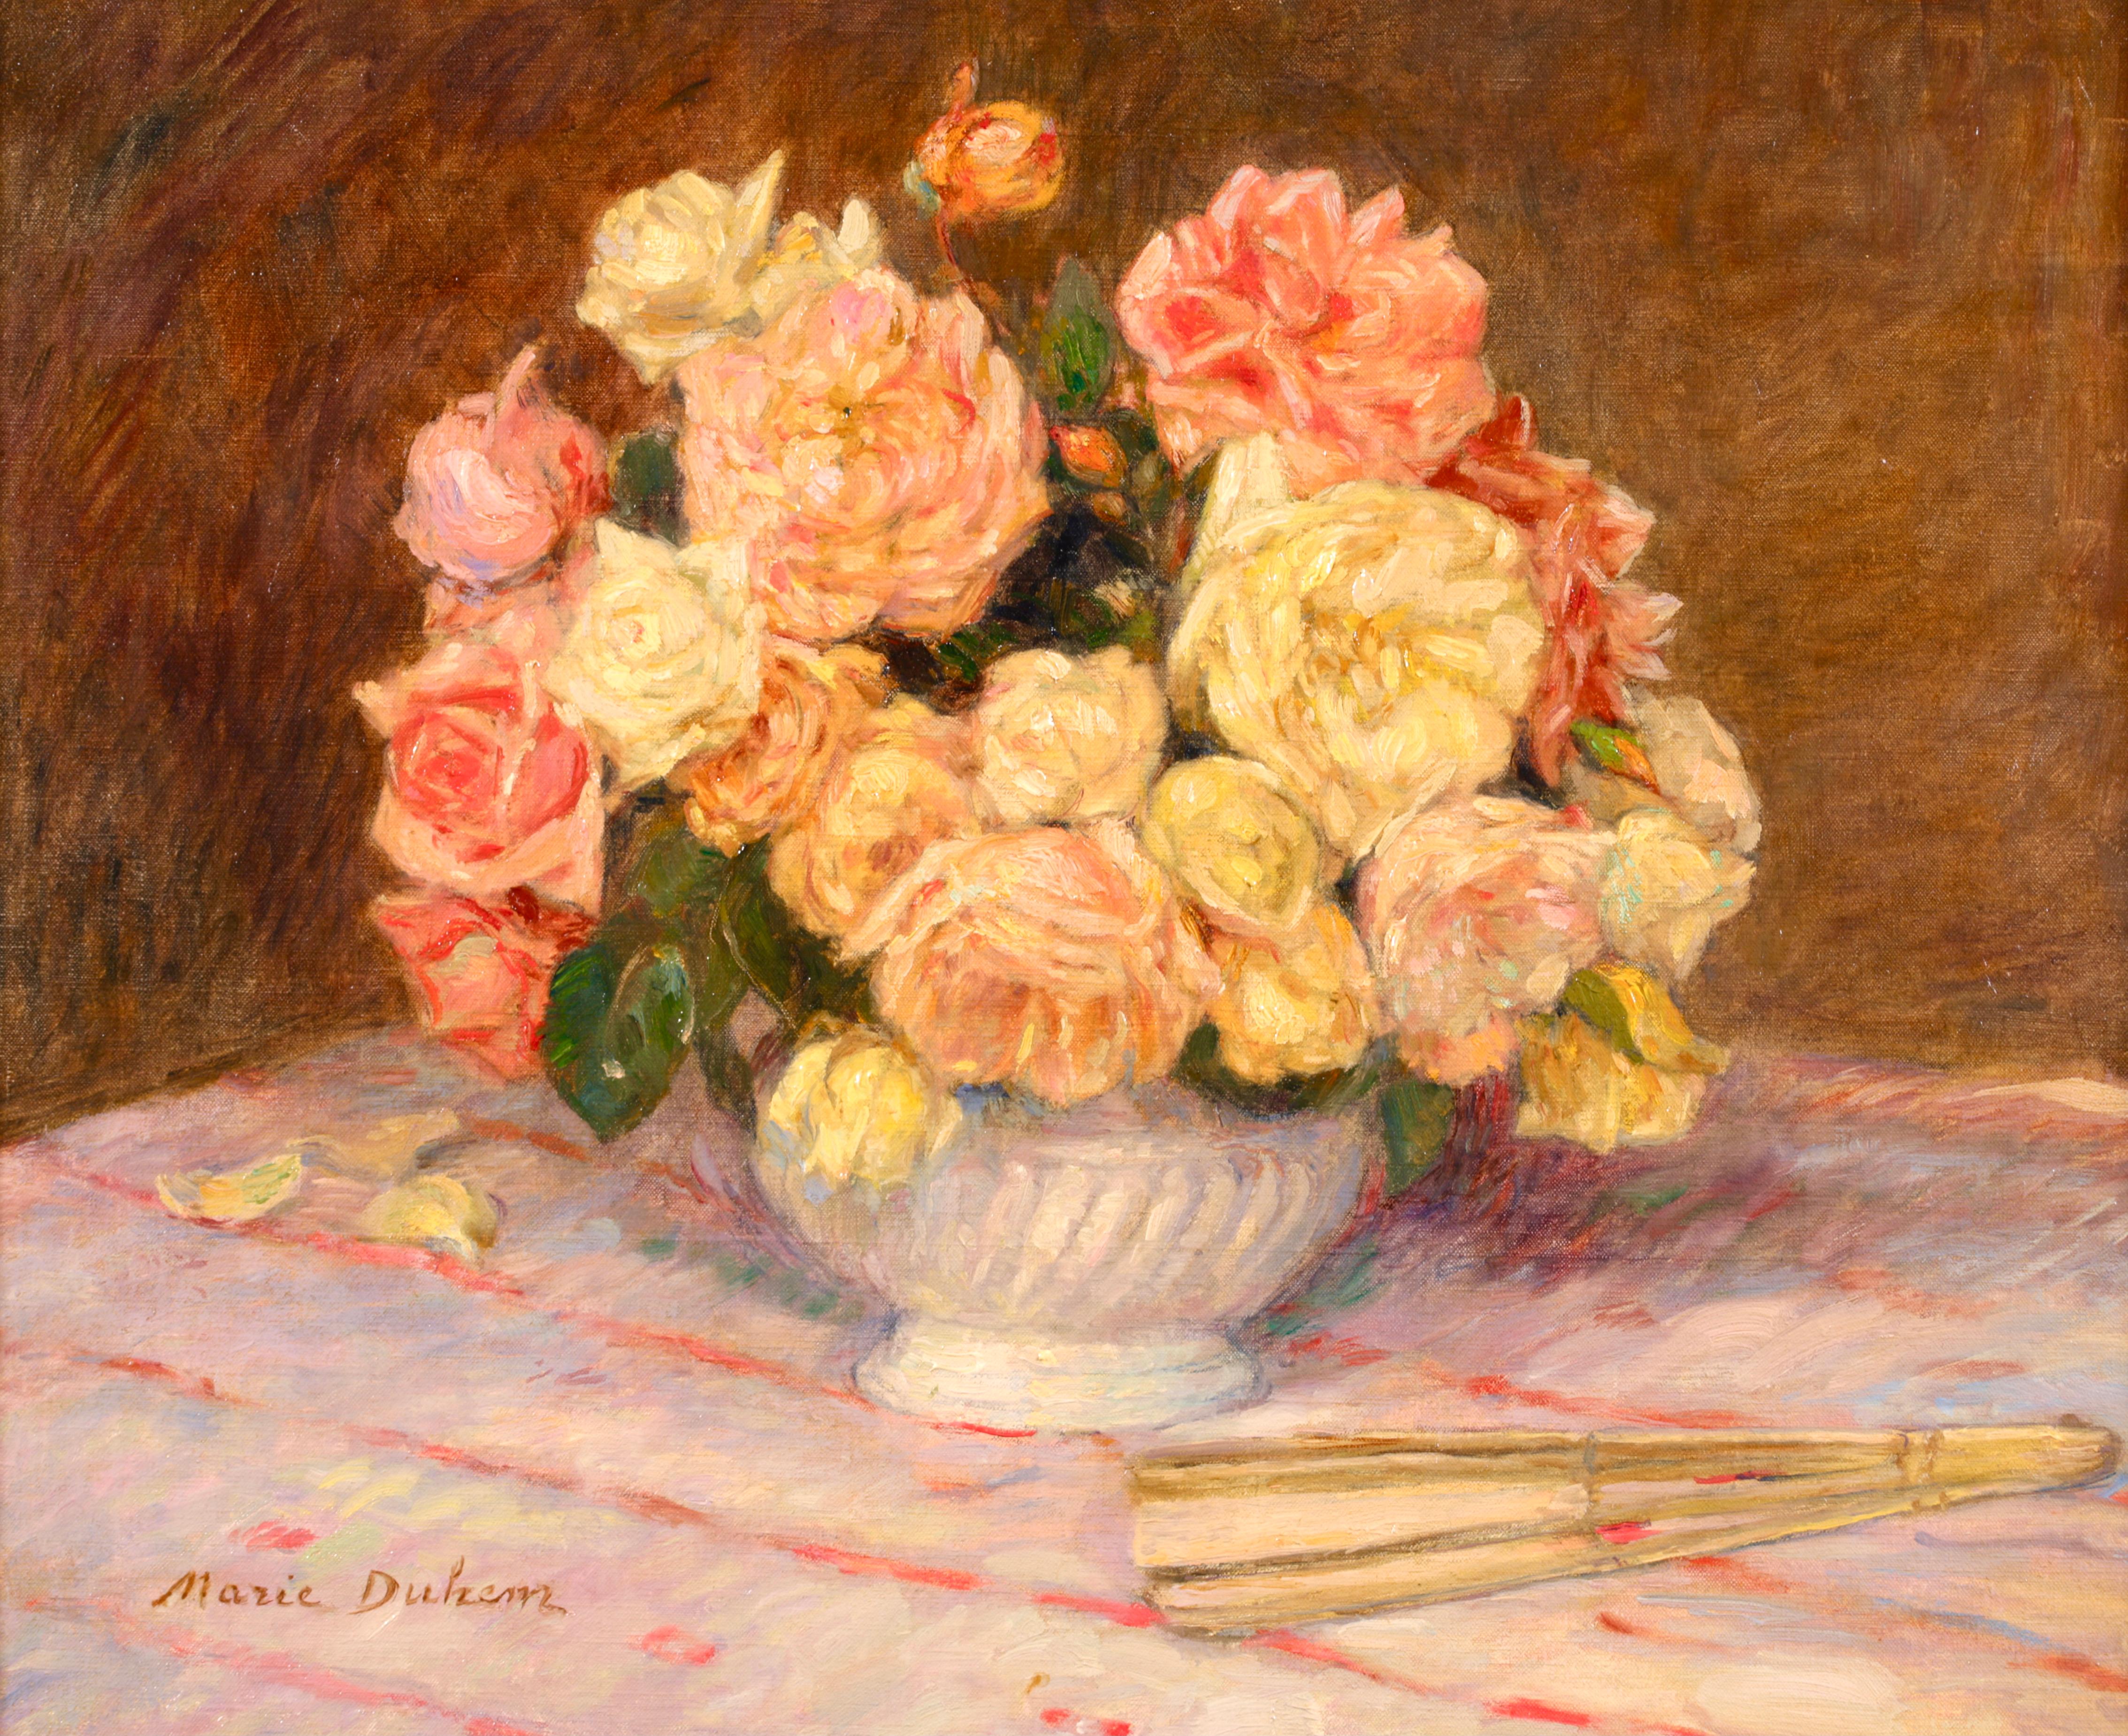 Signed and titled still life oil on canvas circa 1900 by French impressionist painter Marie Duhem. This stunning piece depicts pink and yellow roses in a white ceramic vase with a fan resting beside it. A truly beautiful painting.

Signature
Signed